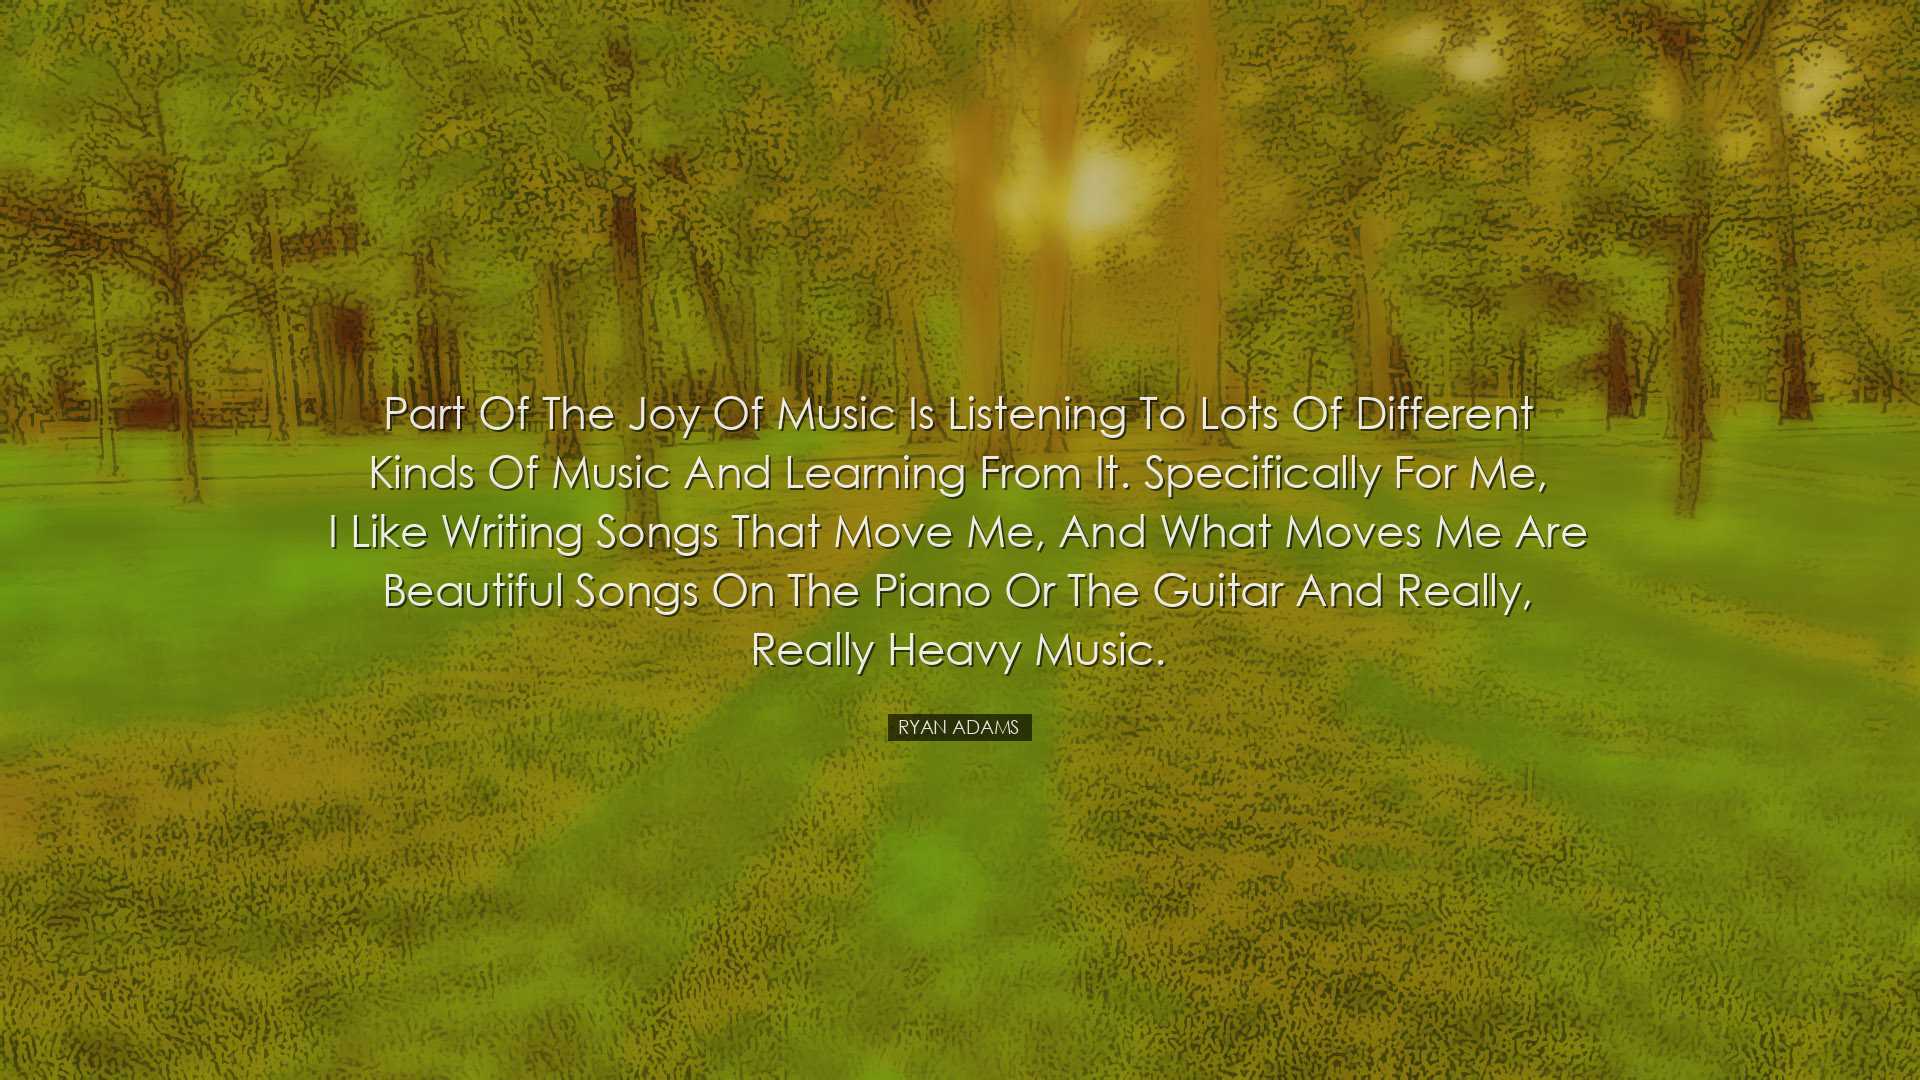 Part of the joy of music is listening to lots of different kinds o